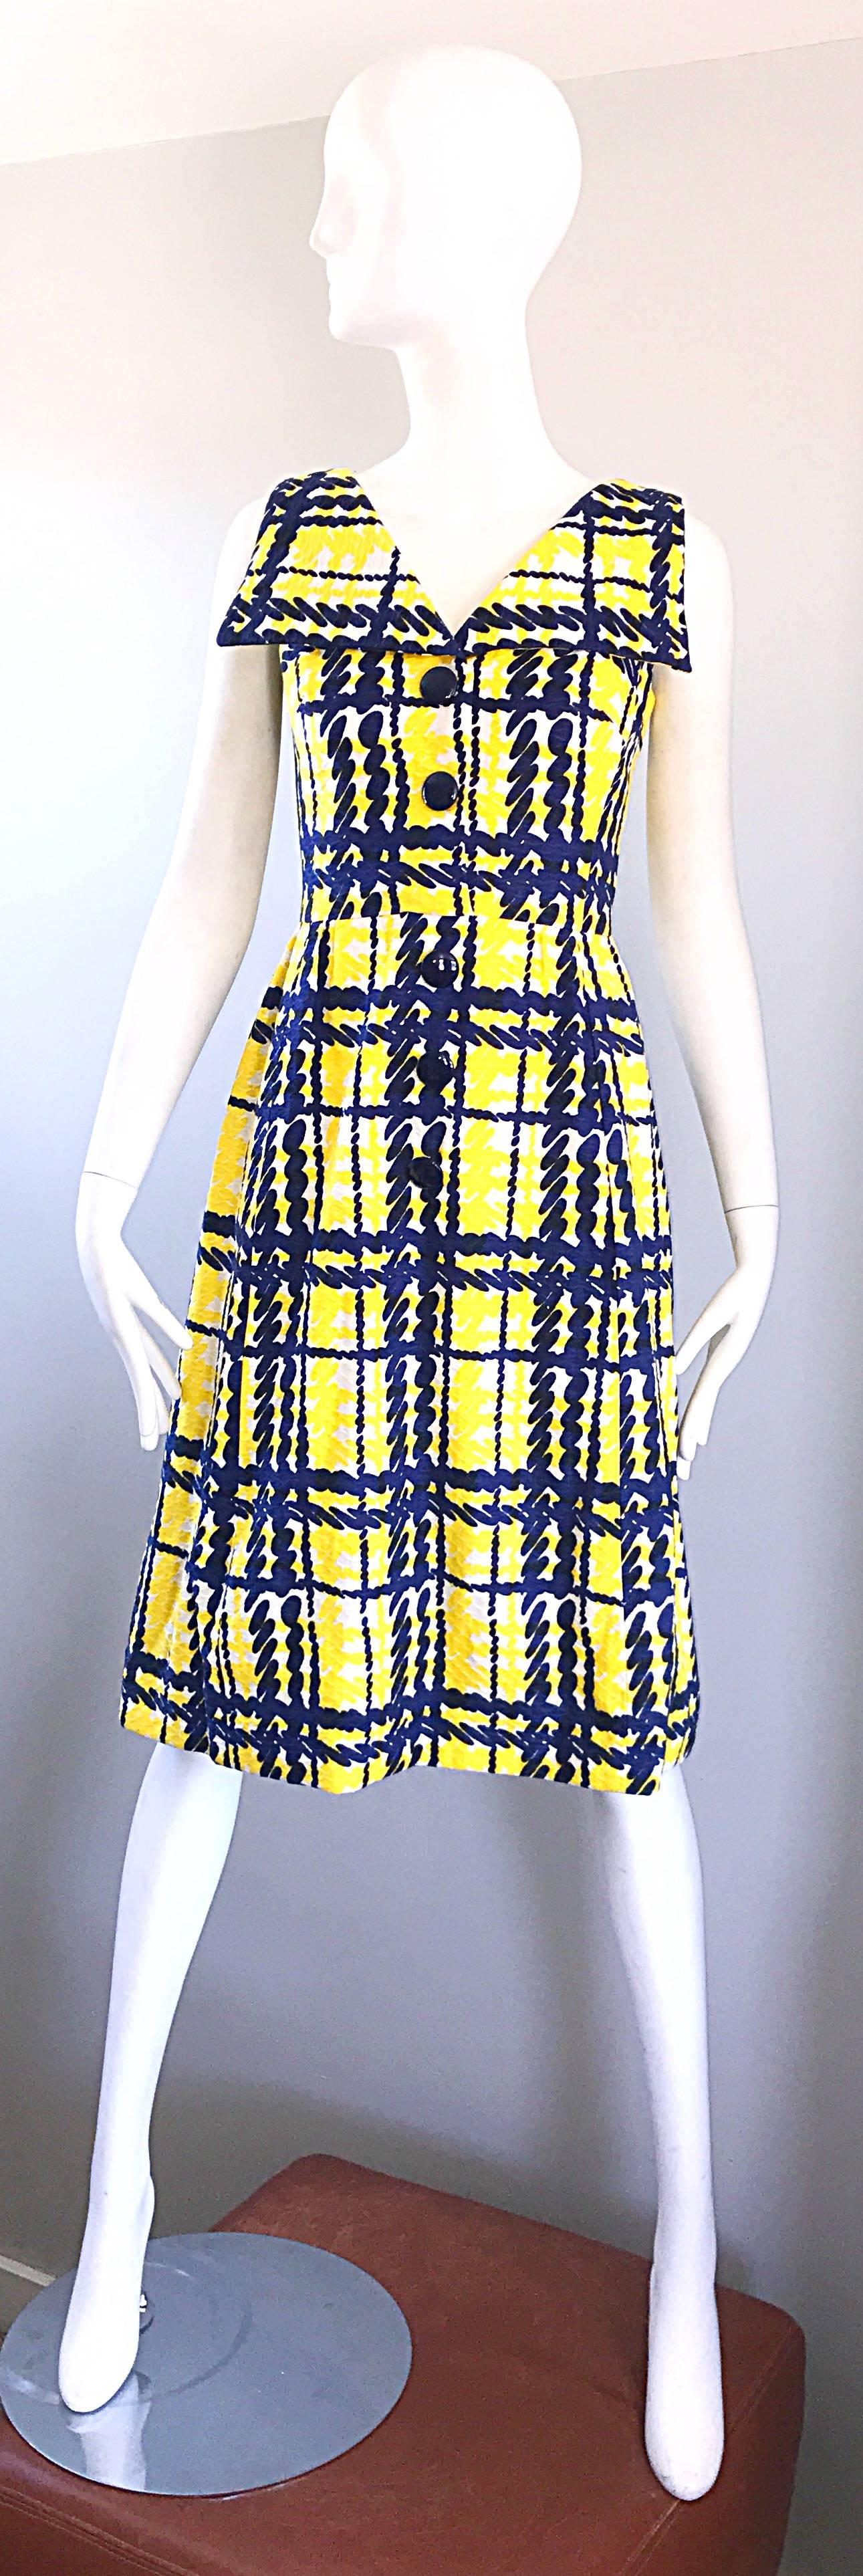 Chic 60s vintage ALAN PHILLIPS navy blue, yellow and White A line dress! Features a unique plaid print, with a nautical collar. Navy lacquer buttons up the bodice. Hidden metal zipper up the back with hook-and-eye closure. Nice textured cotton holds